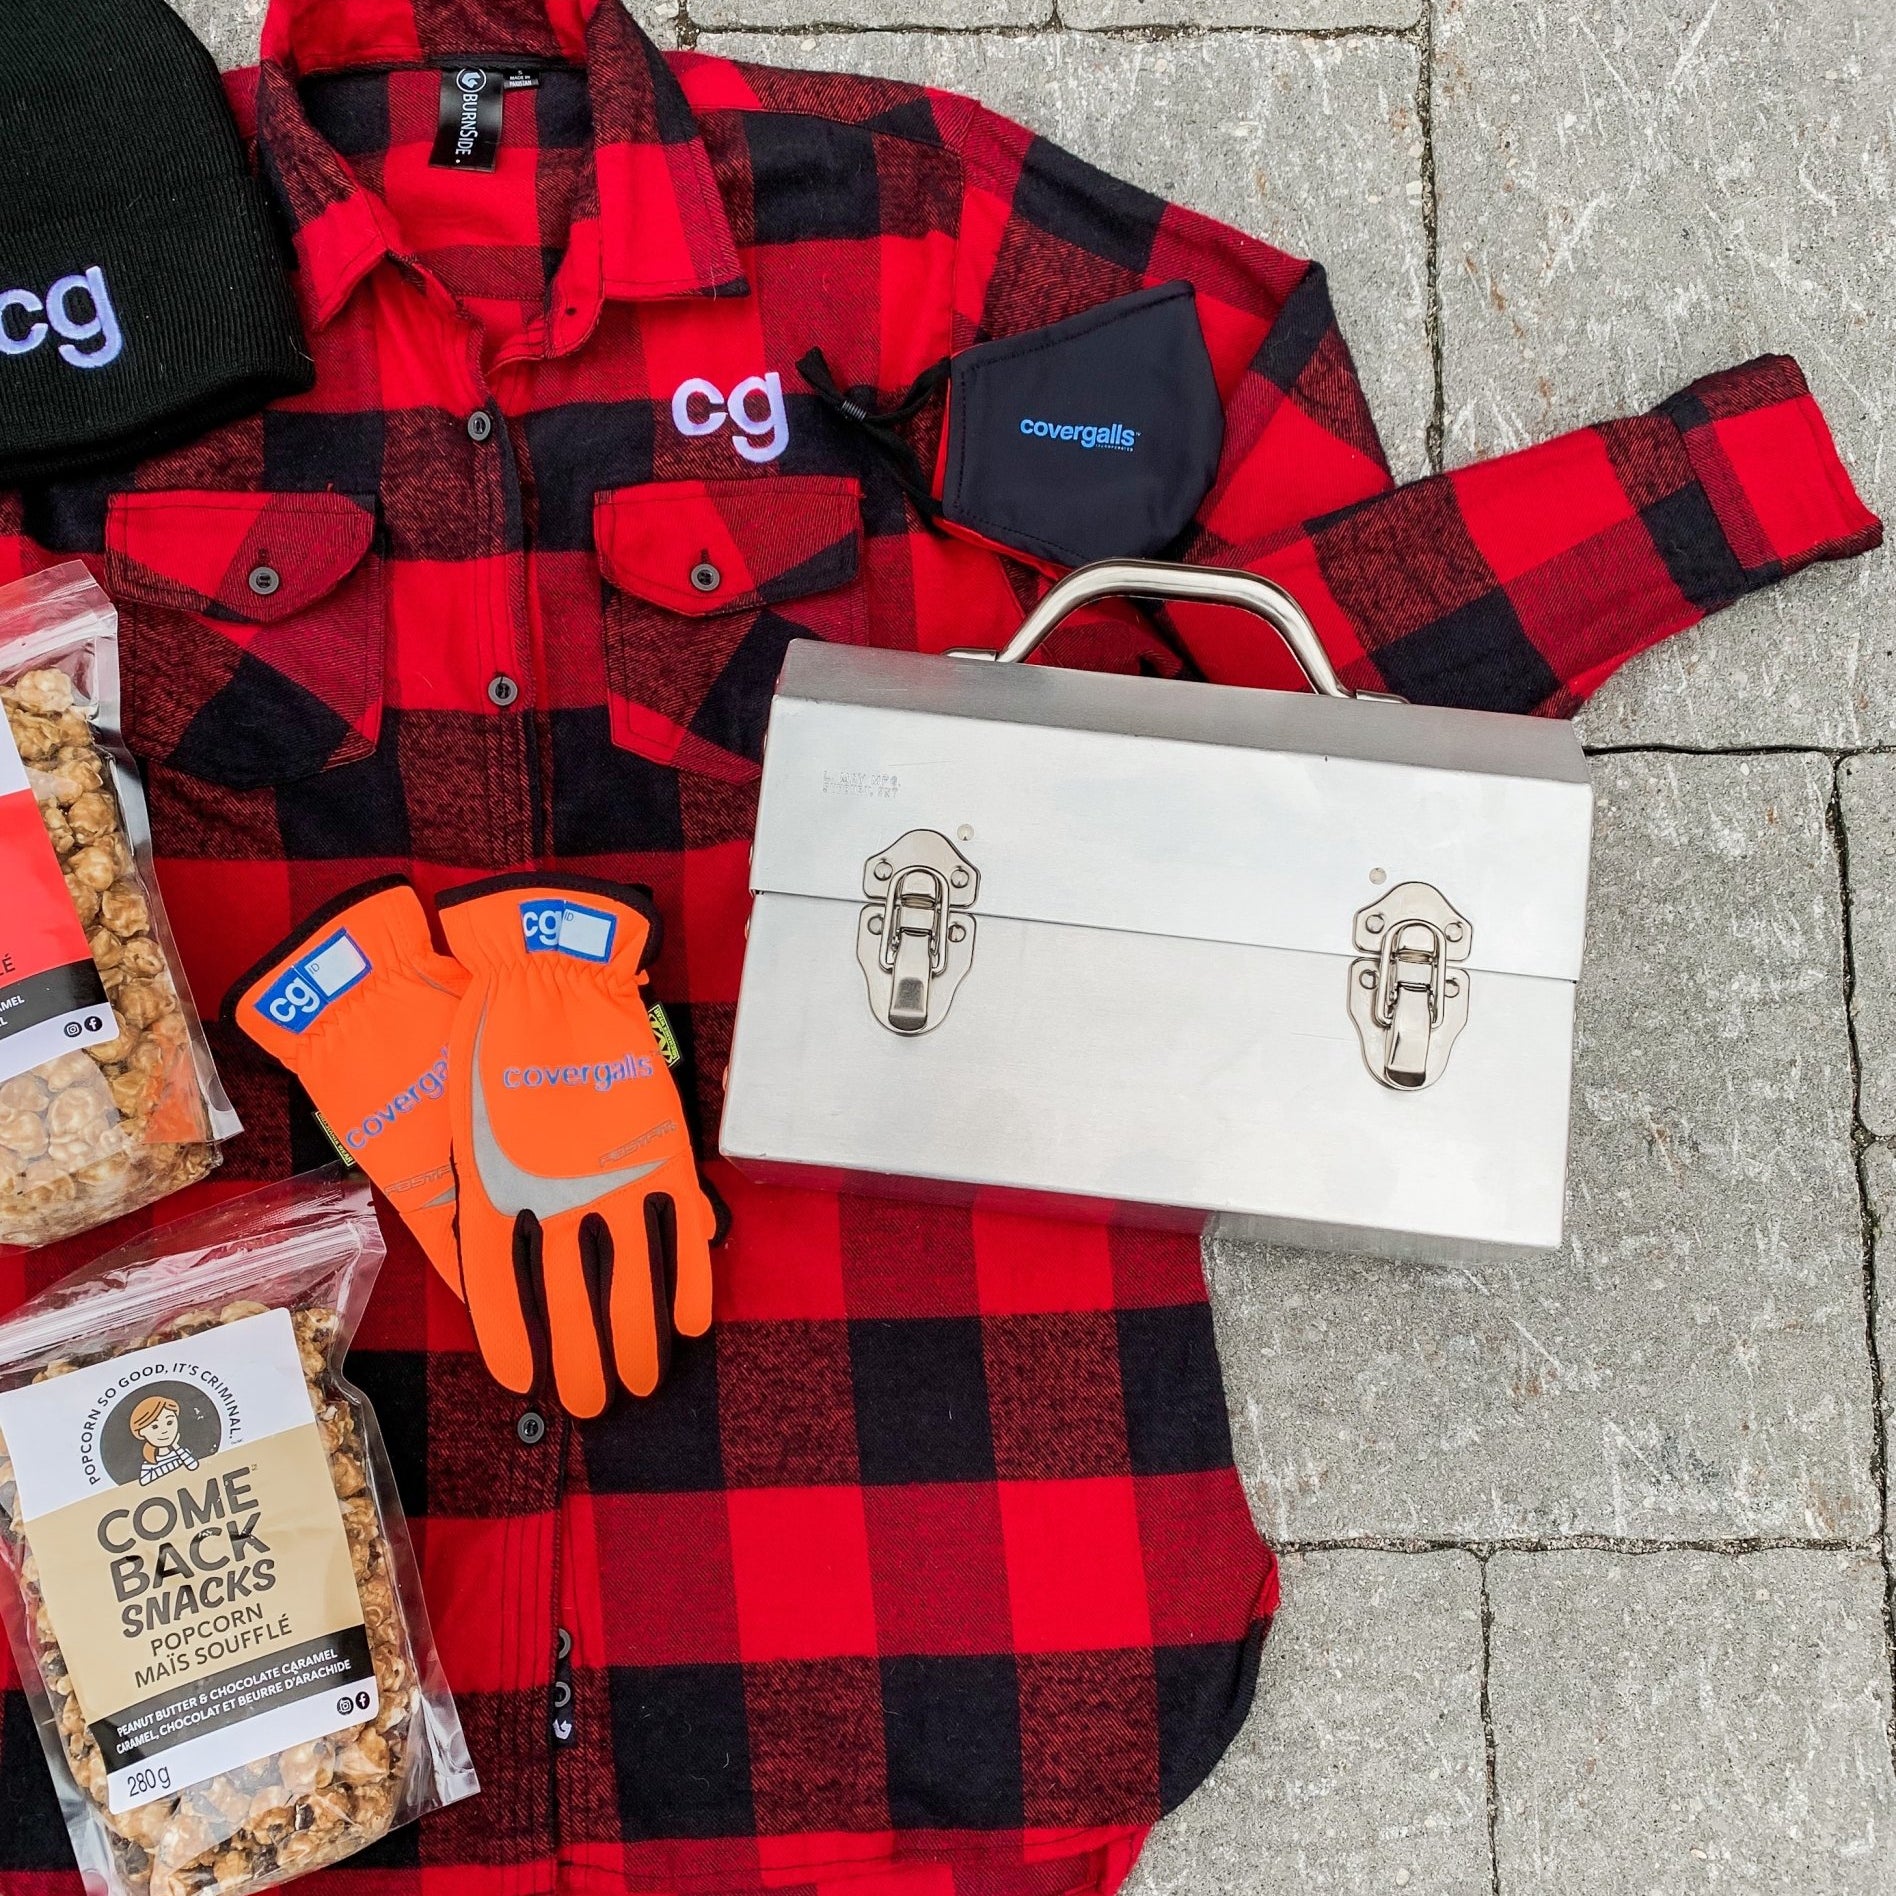 covergalls flannel t shirt and an L. May metal lunchbox with come back snacks